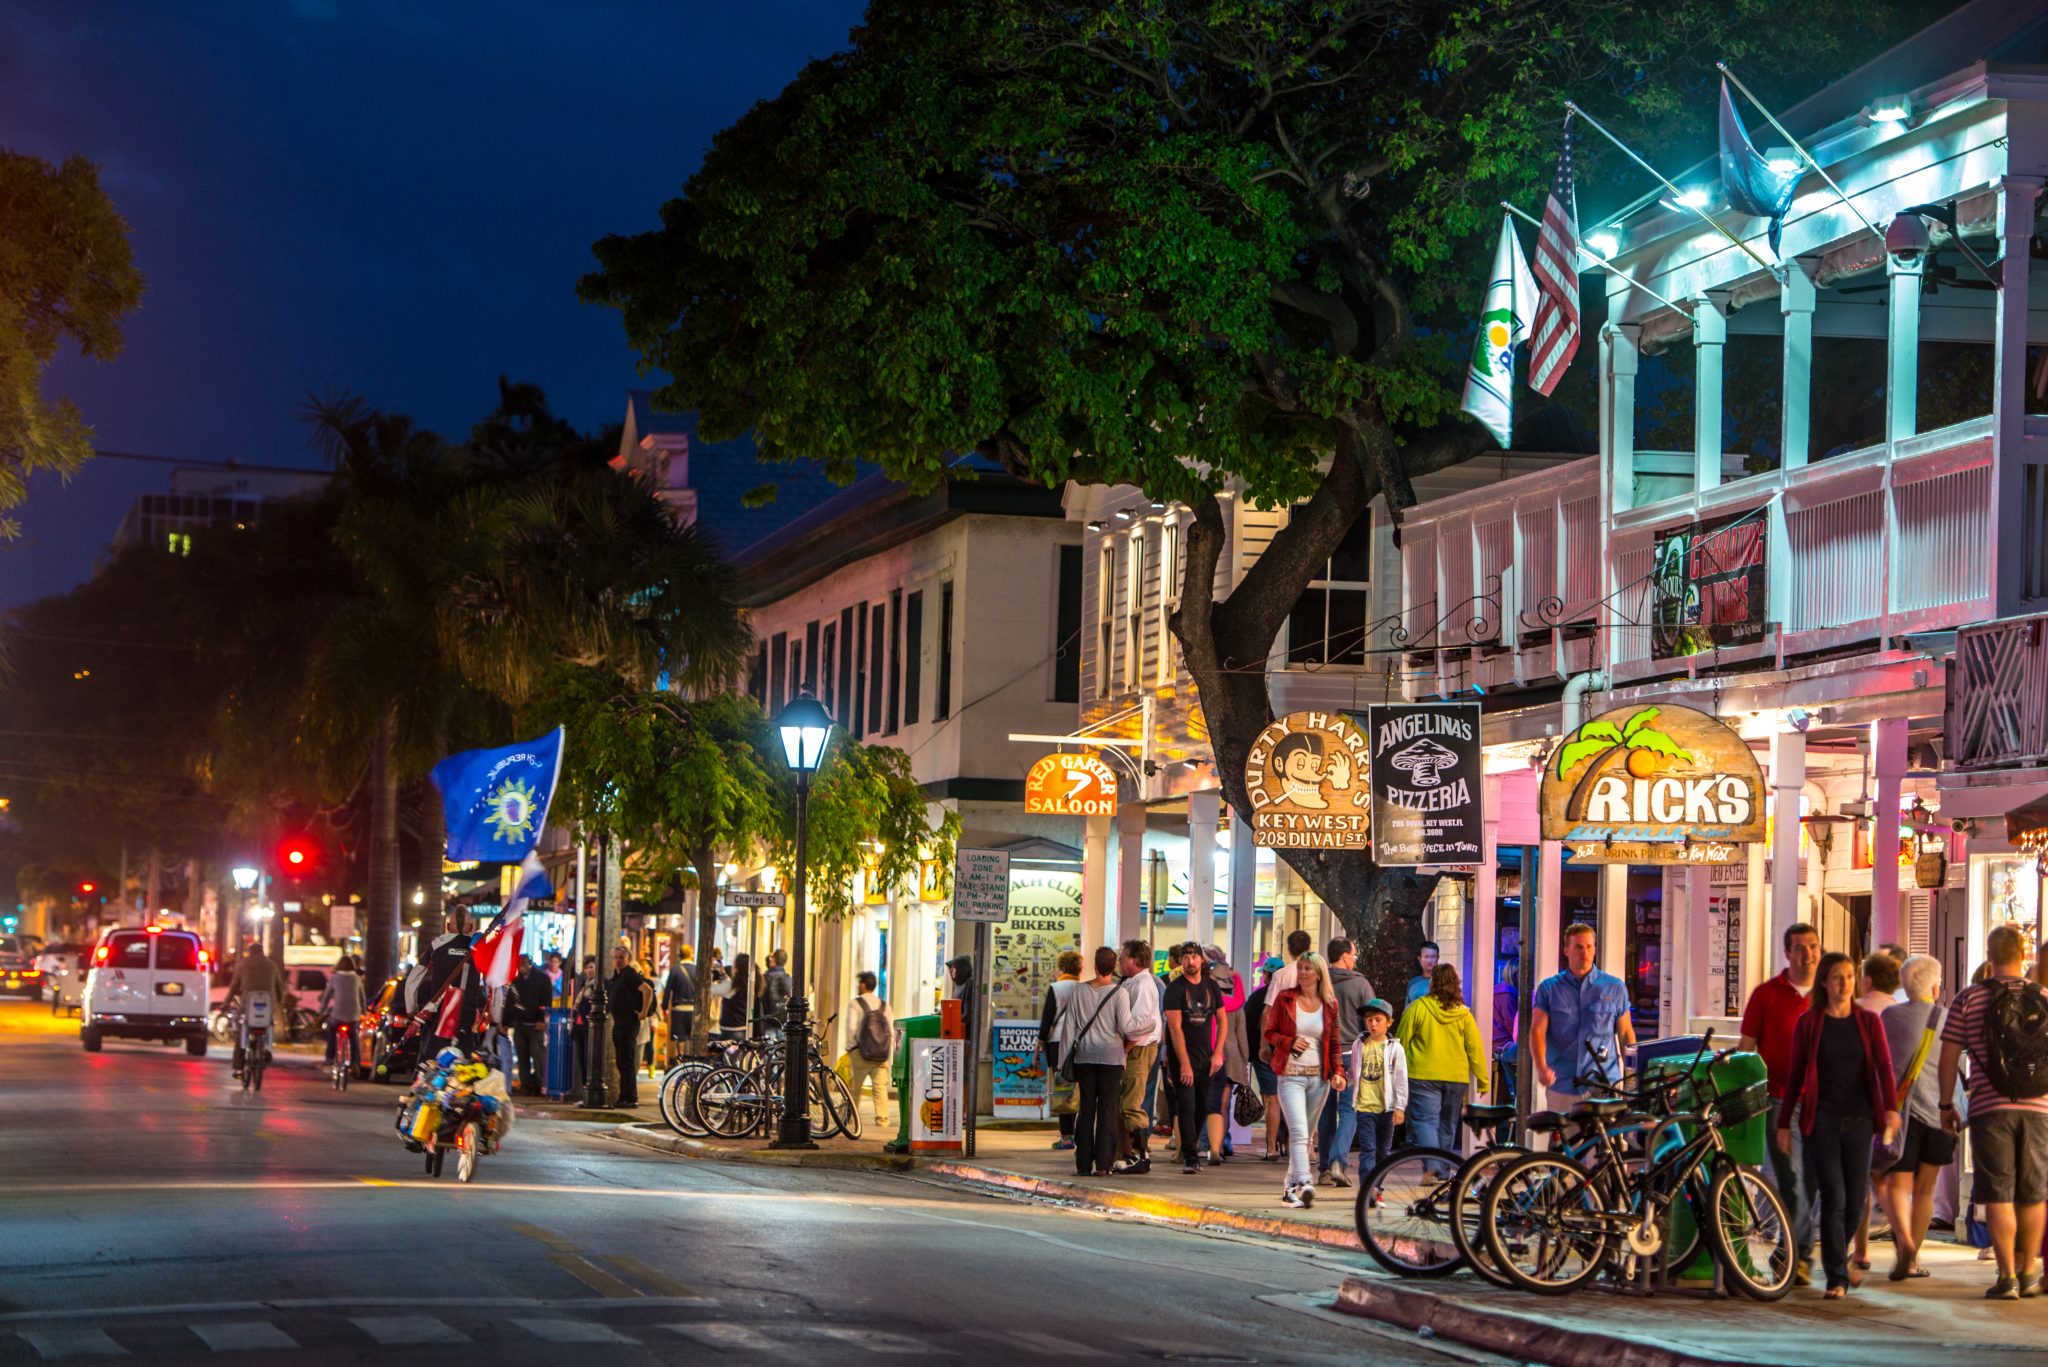 key-west-usa-january-8-2015-key-west-streets-by-night-people-walking-shopping-and-looking-for-a-dinner-stockpack-istock